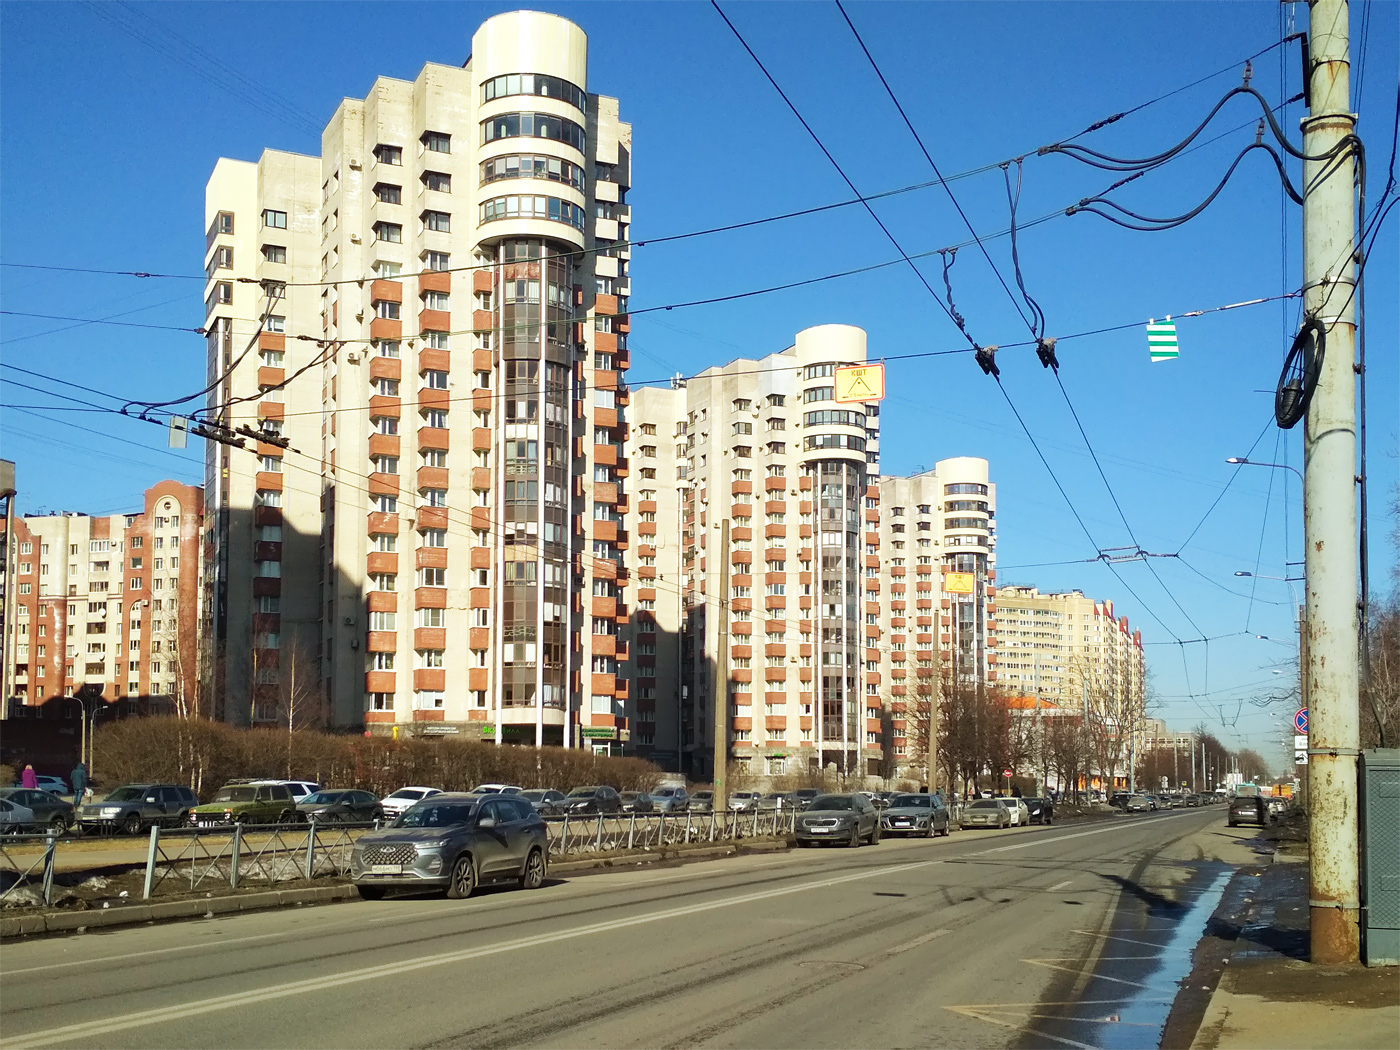 Sankt-Peterburg — Trolleybus lines and infrastructure